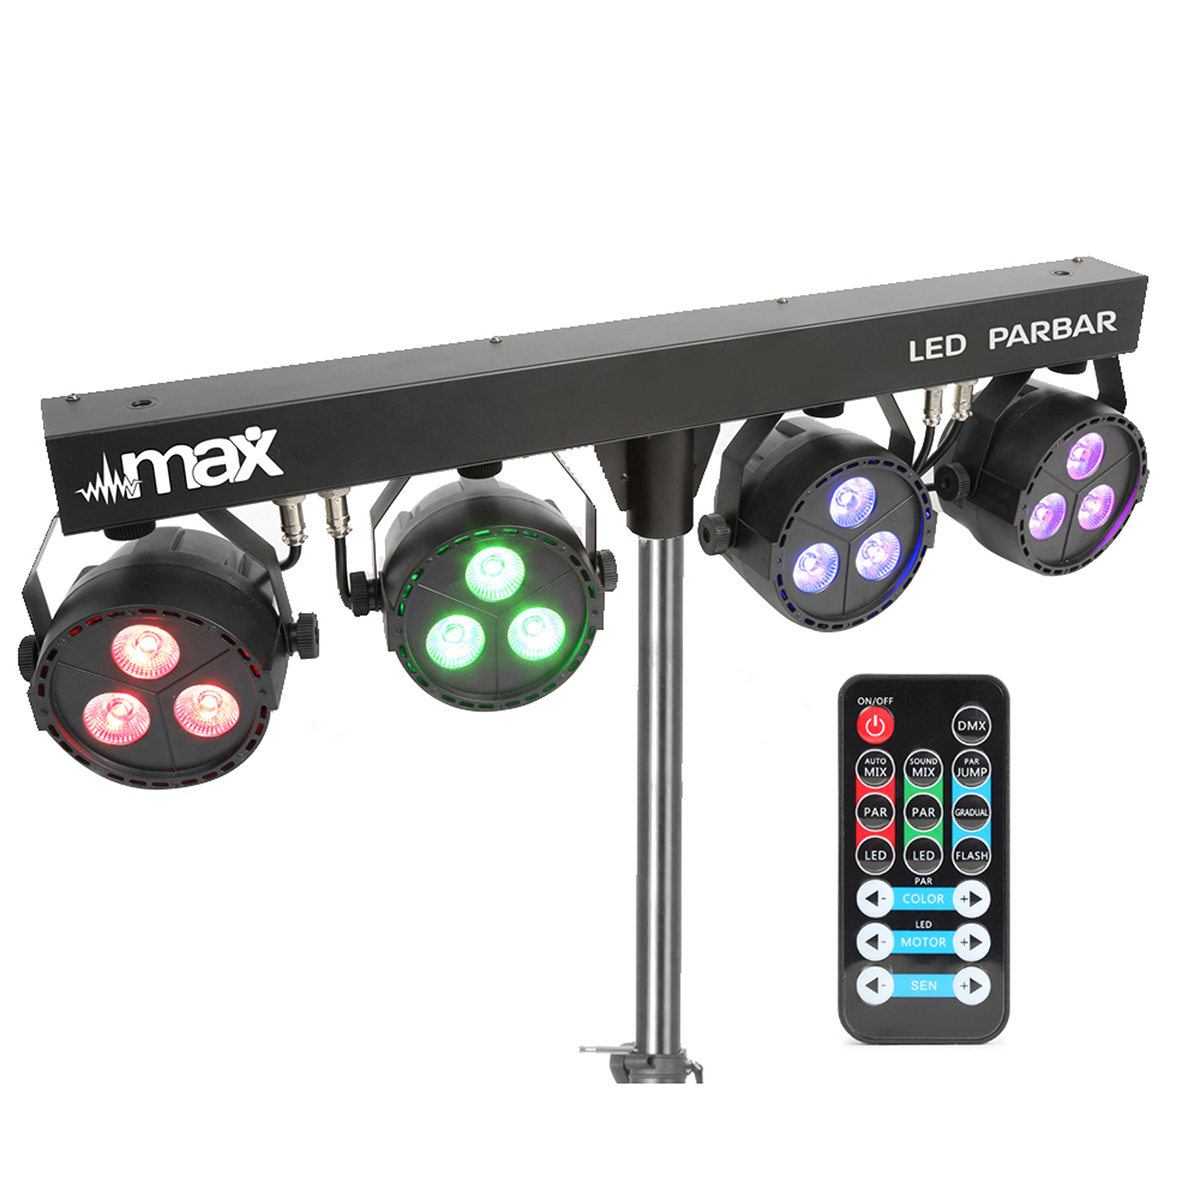 Max ParBar LED Party Lighting Stand